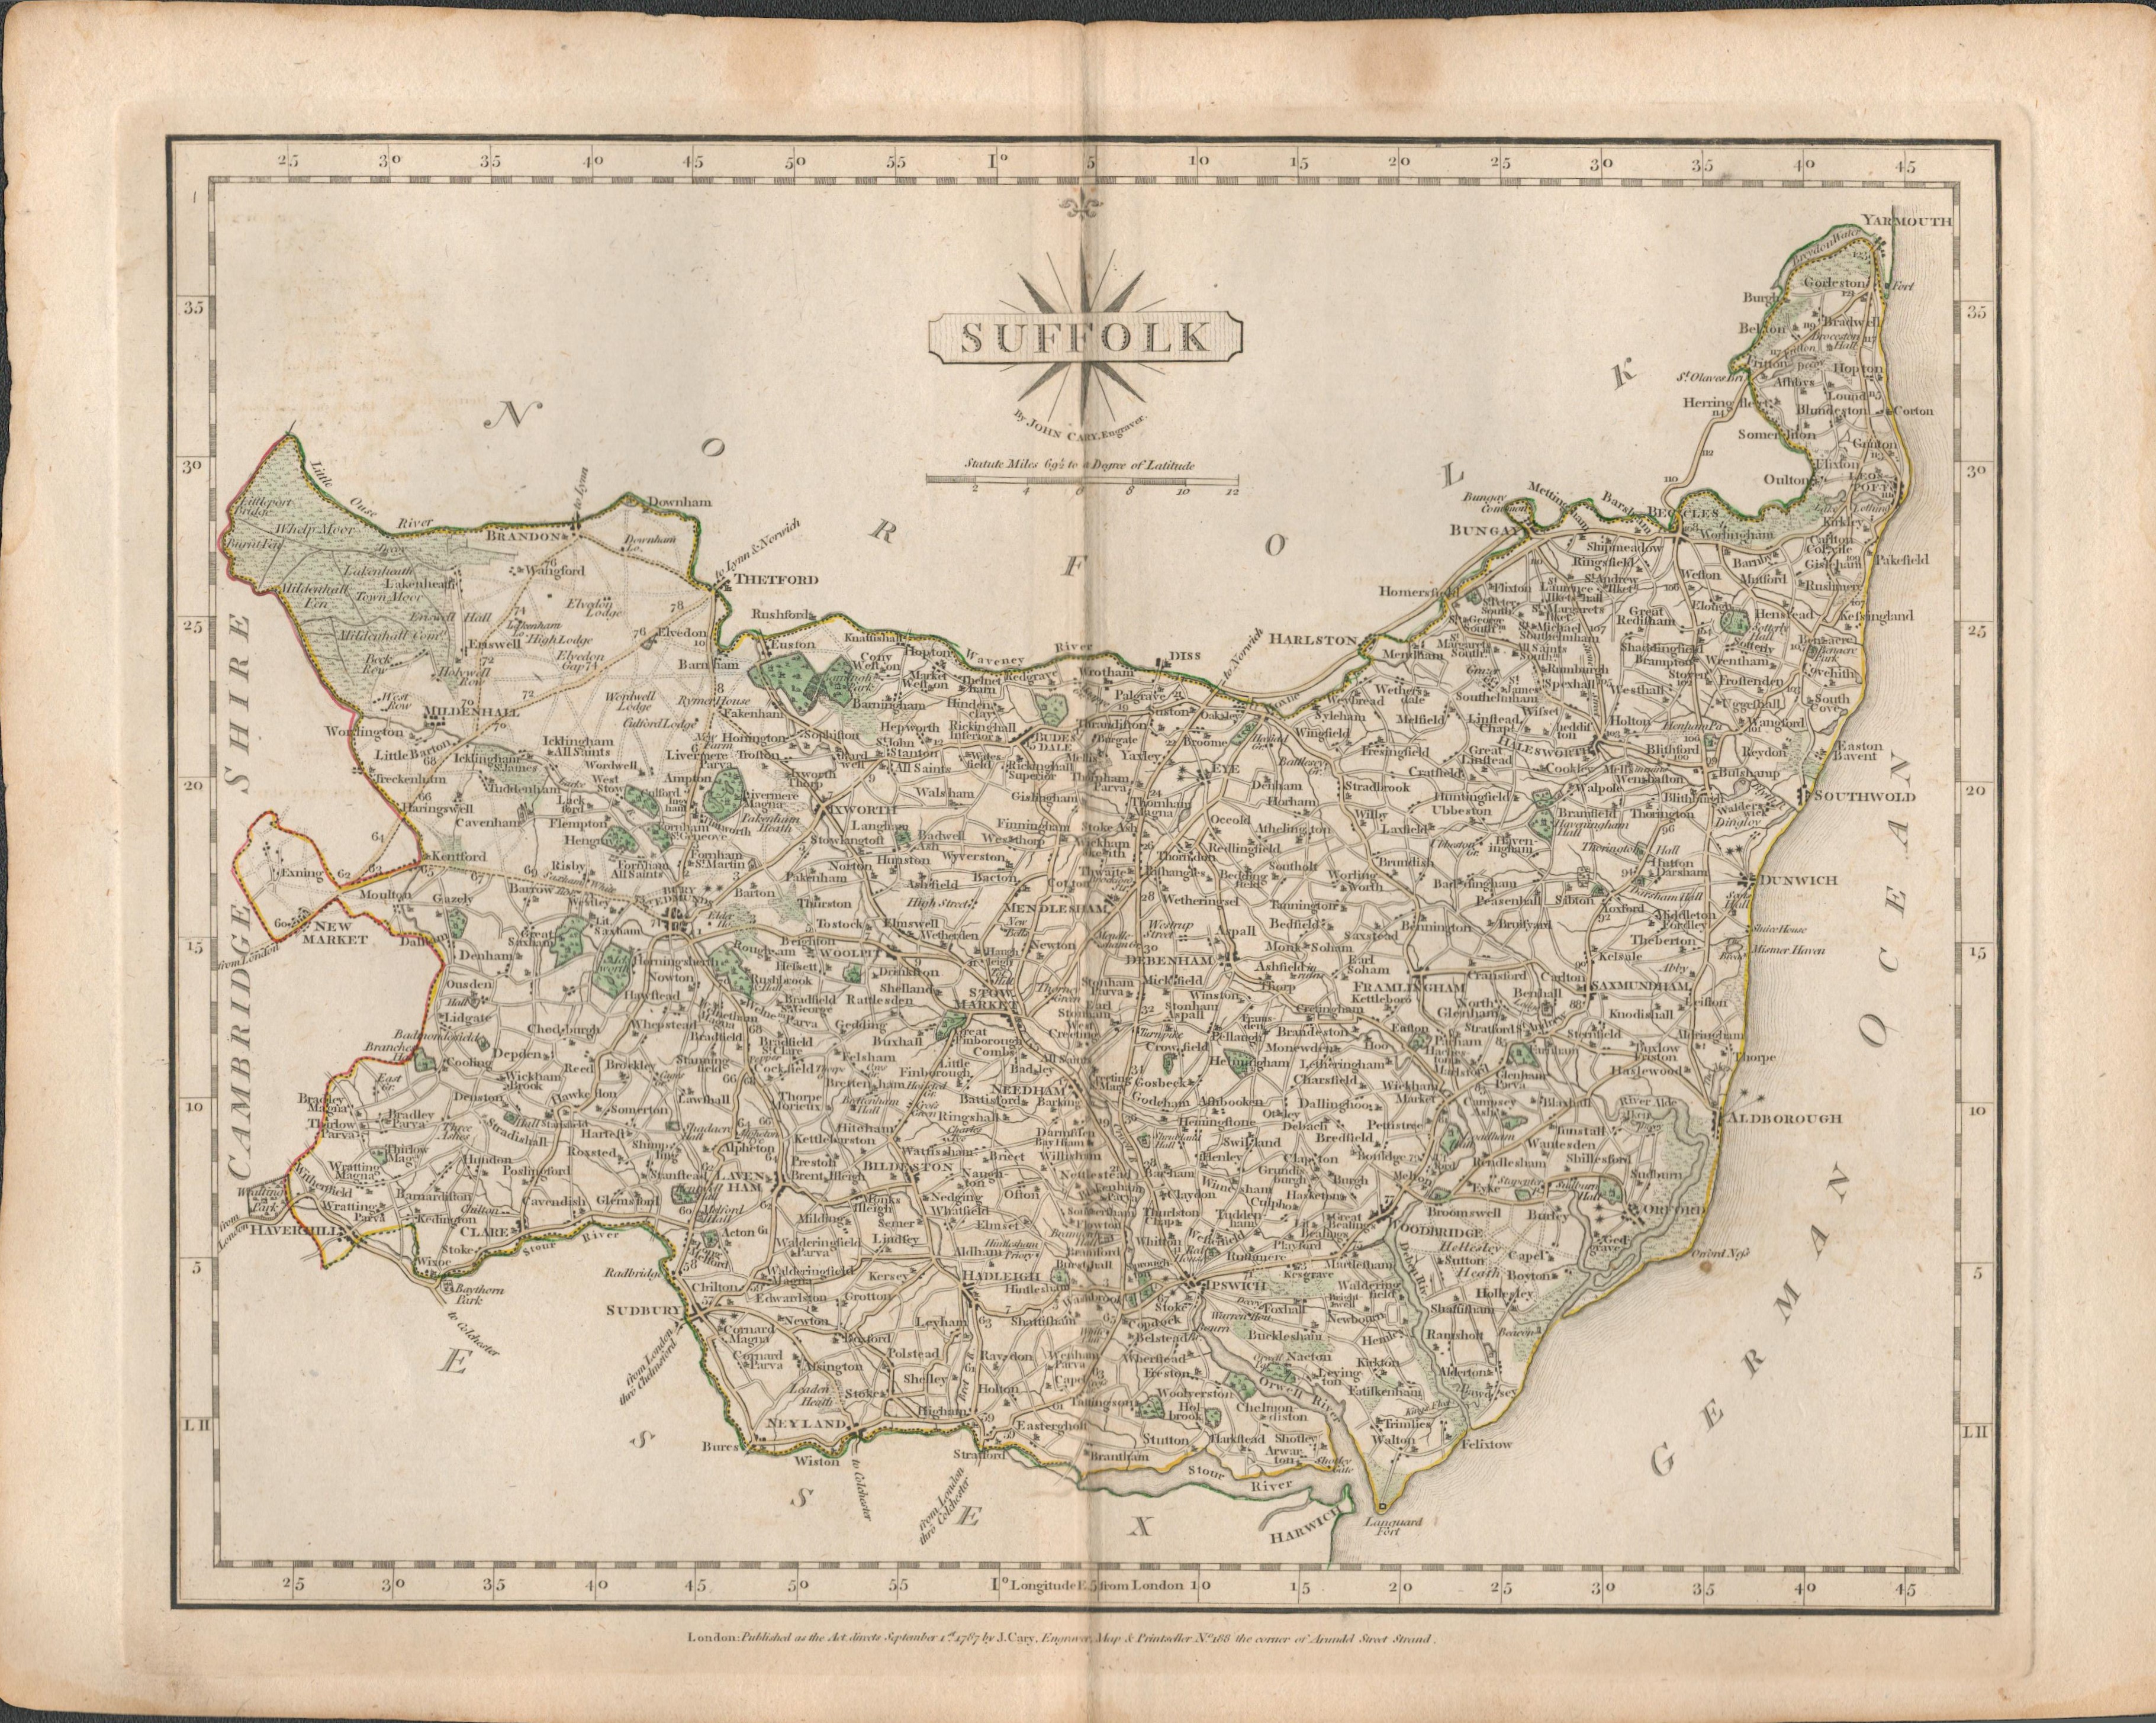 County of Suffolk John Cary’s 1787 Antique Hand Coloured Map.